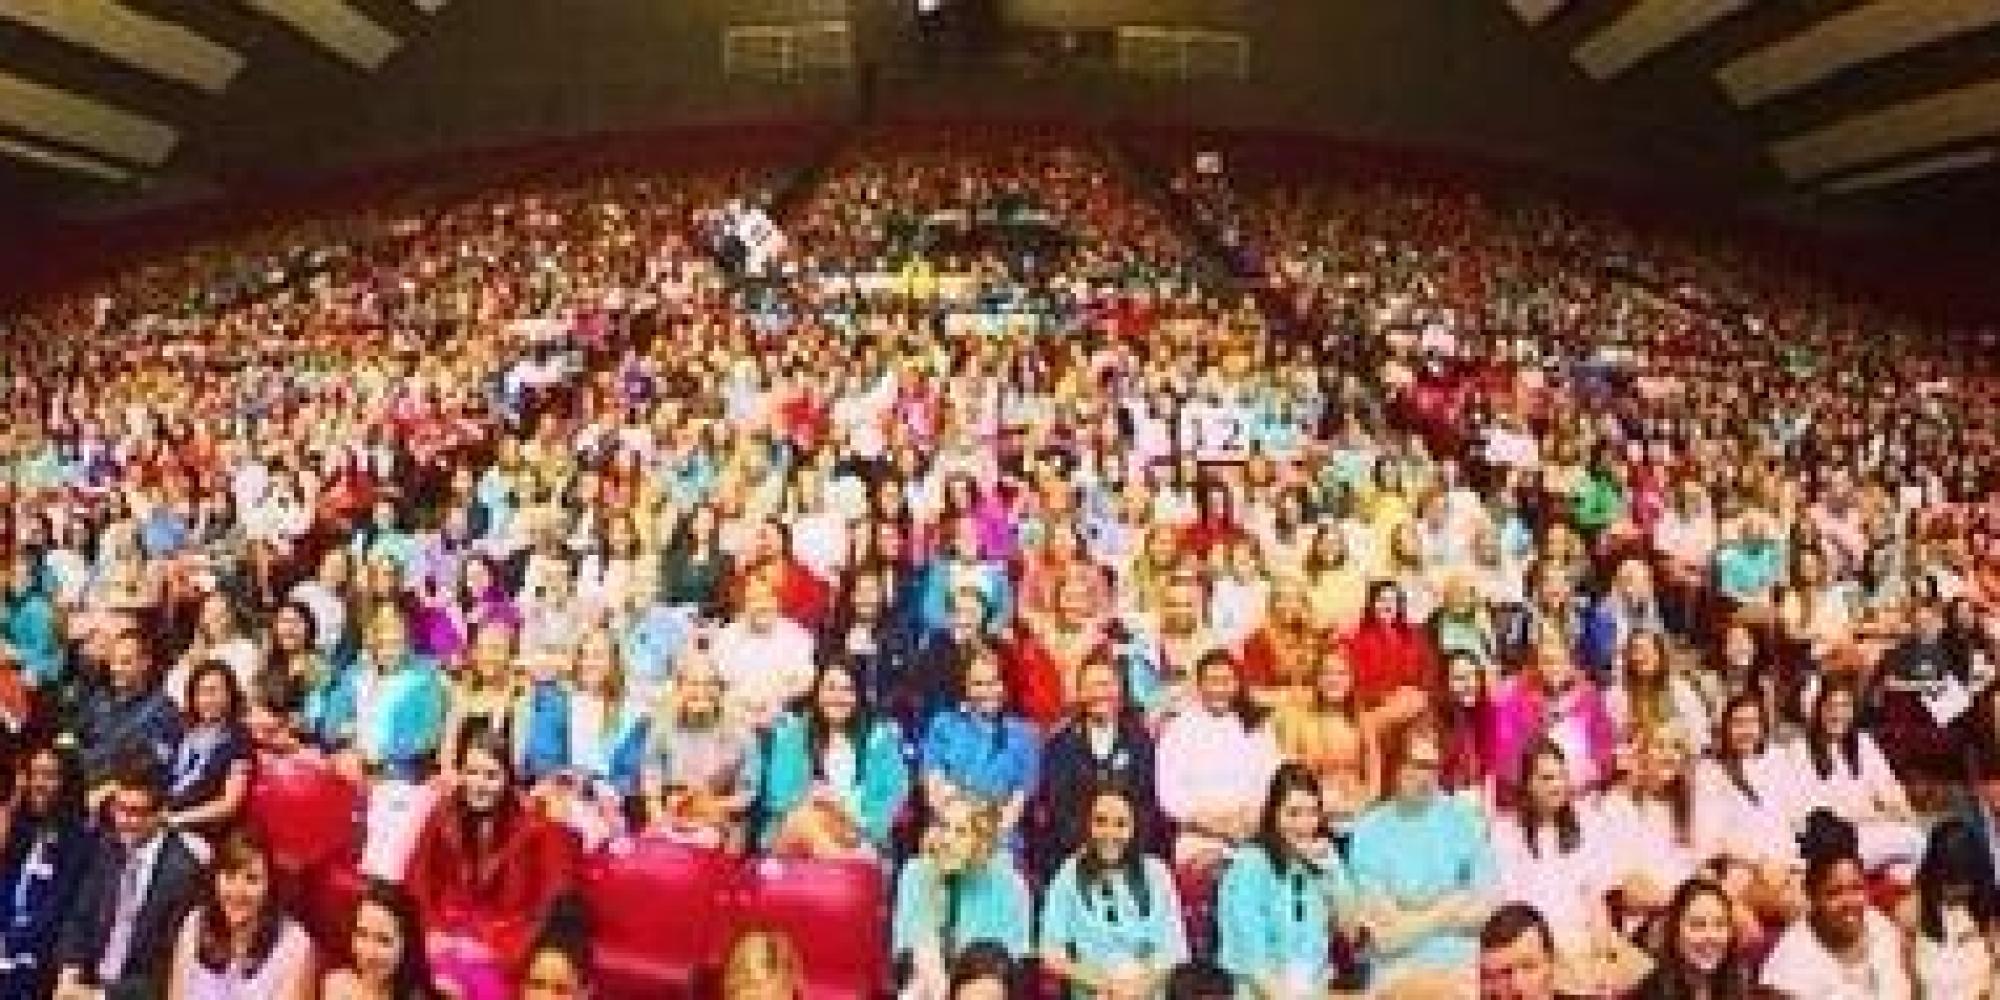 University Of Alabama Has The Largest Sorority Rush In The Nation